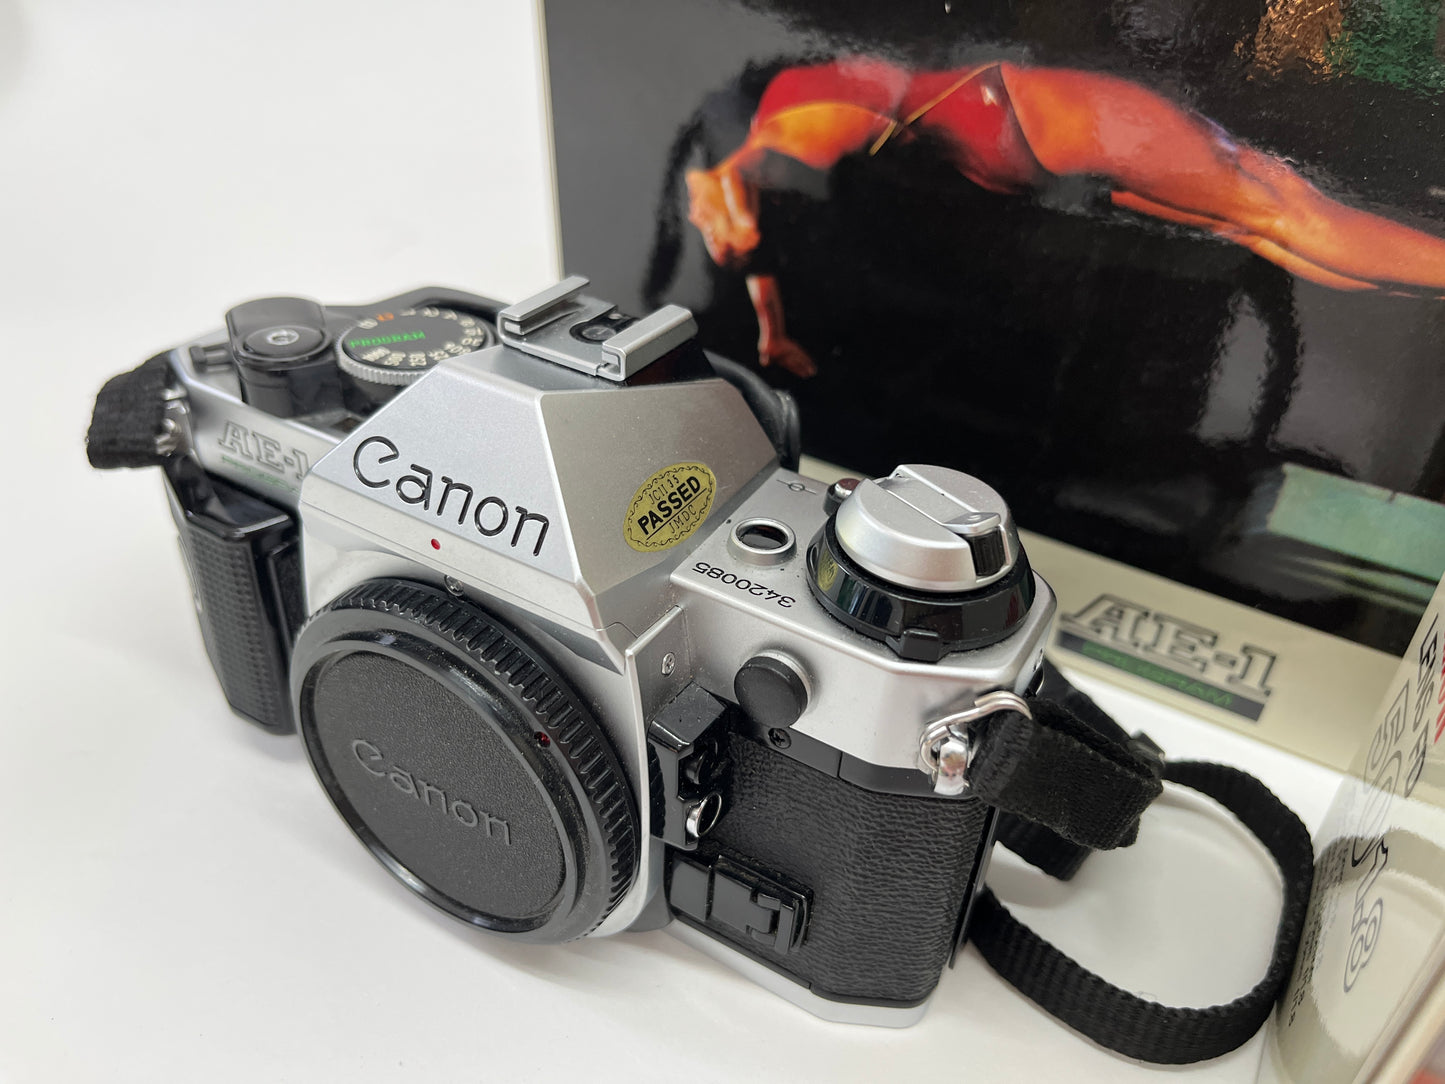 Canon AE-1 Program and 50/1.8 Lens Boxed 1984 Olympic NOS